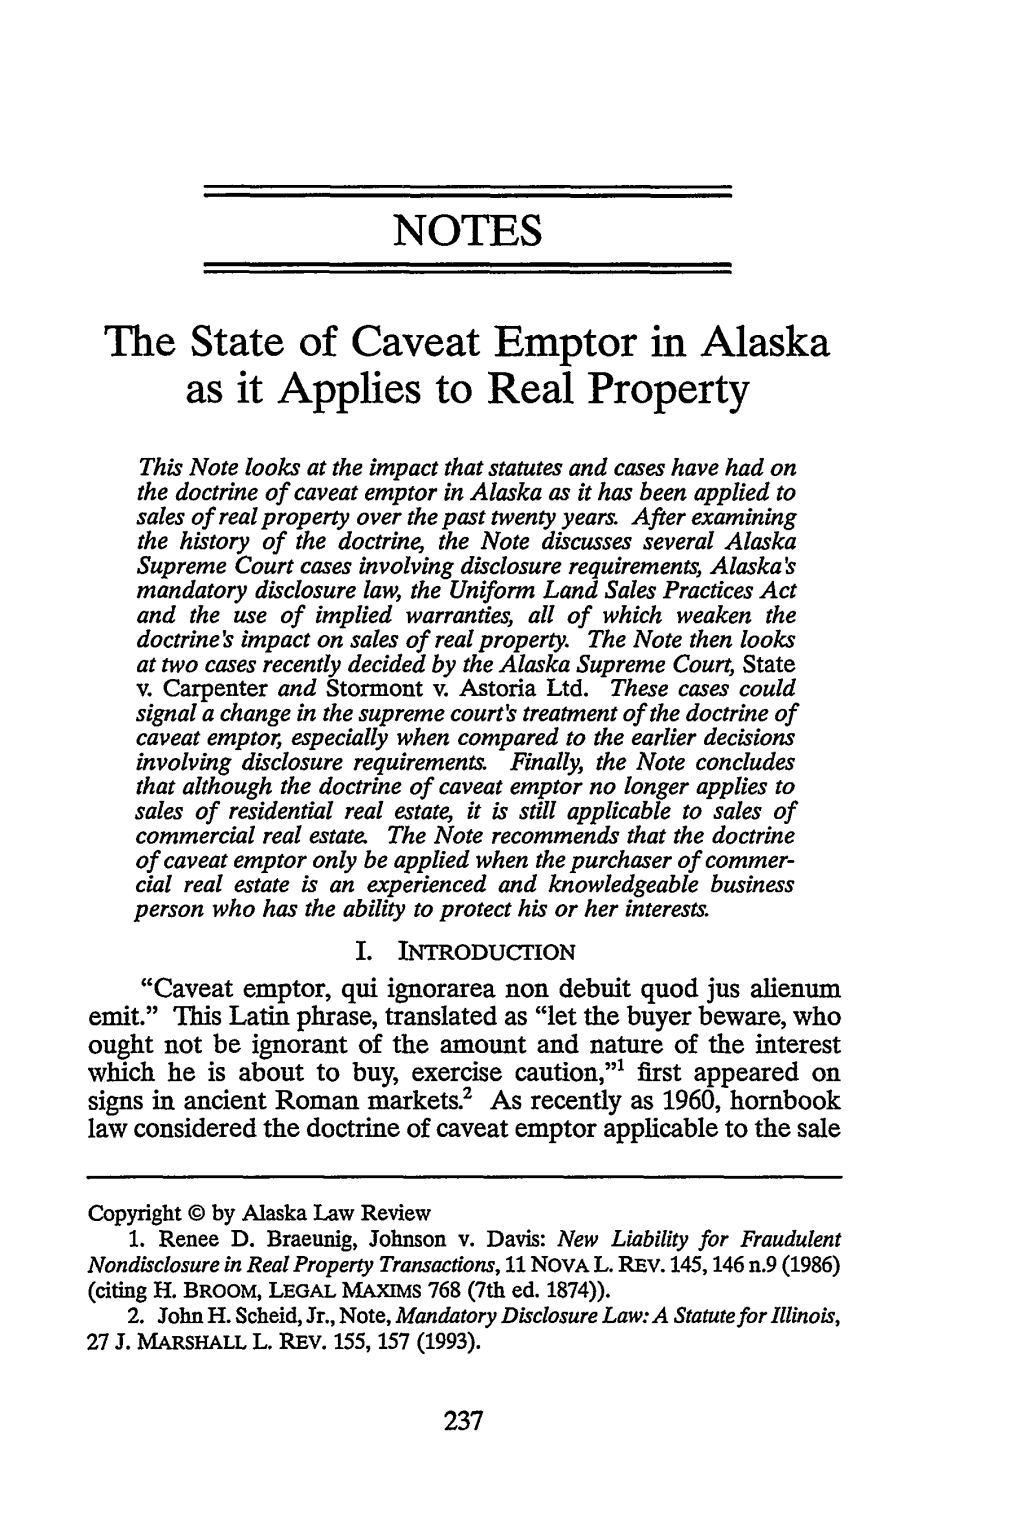 The State of Caveat Emptor in Alaska As It Applies to Real Property